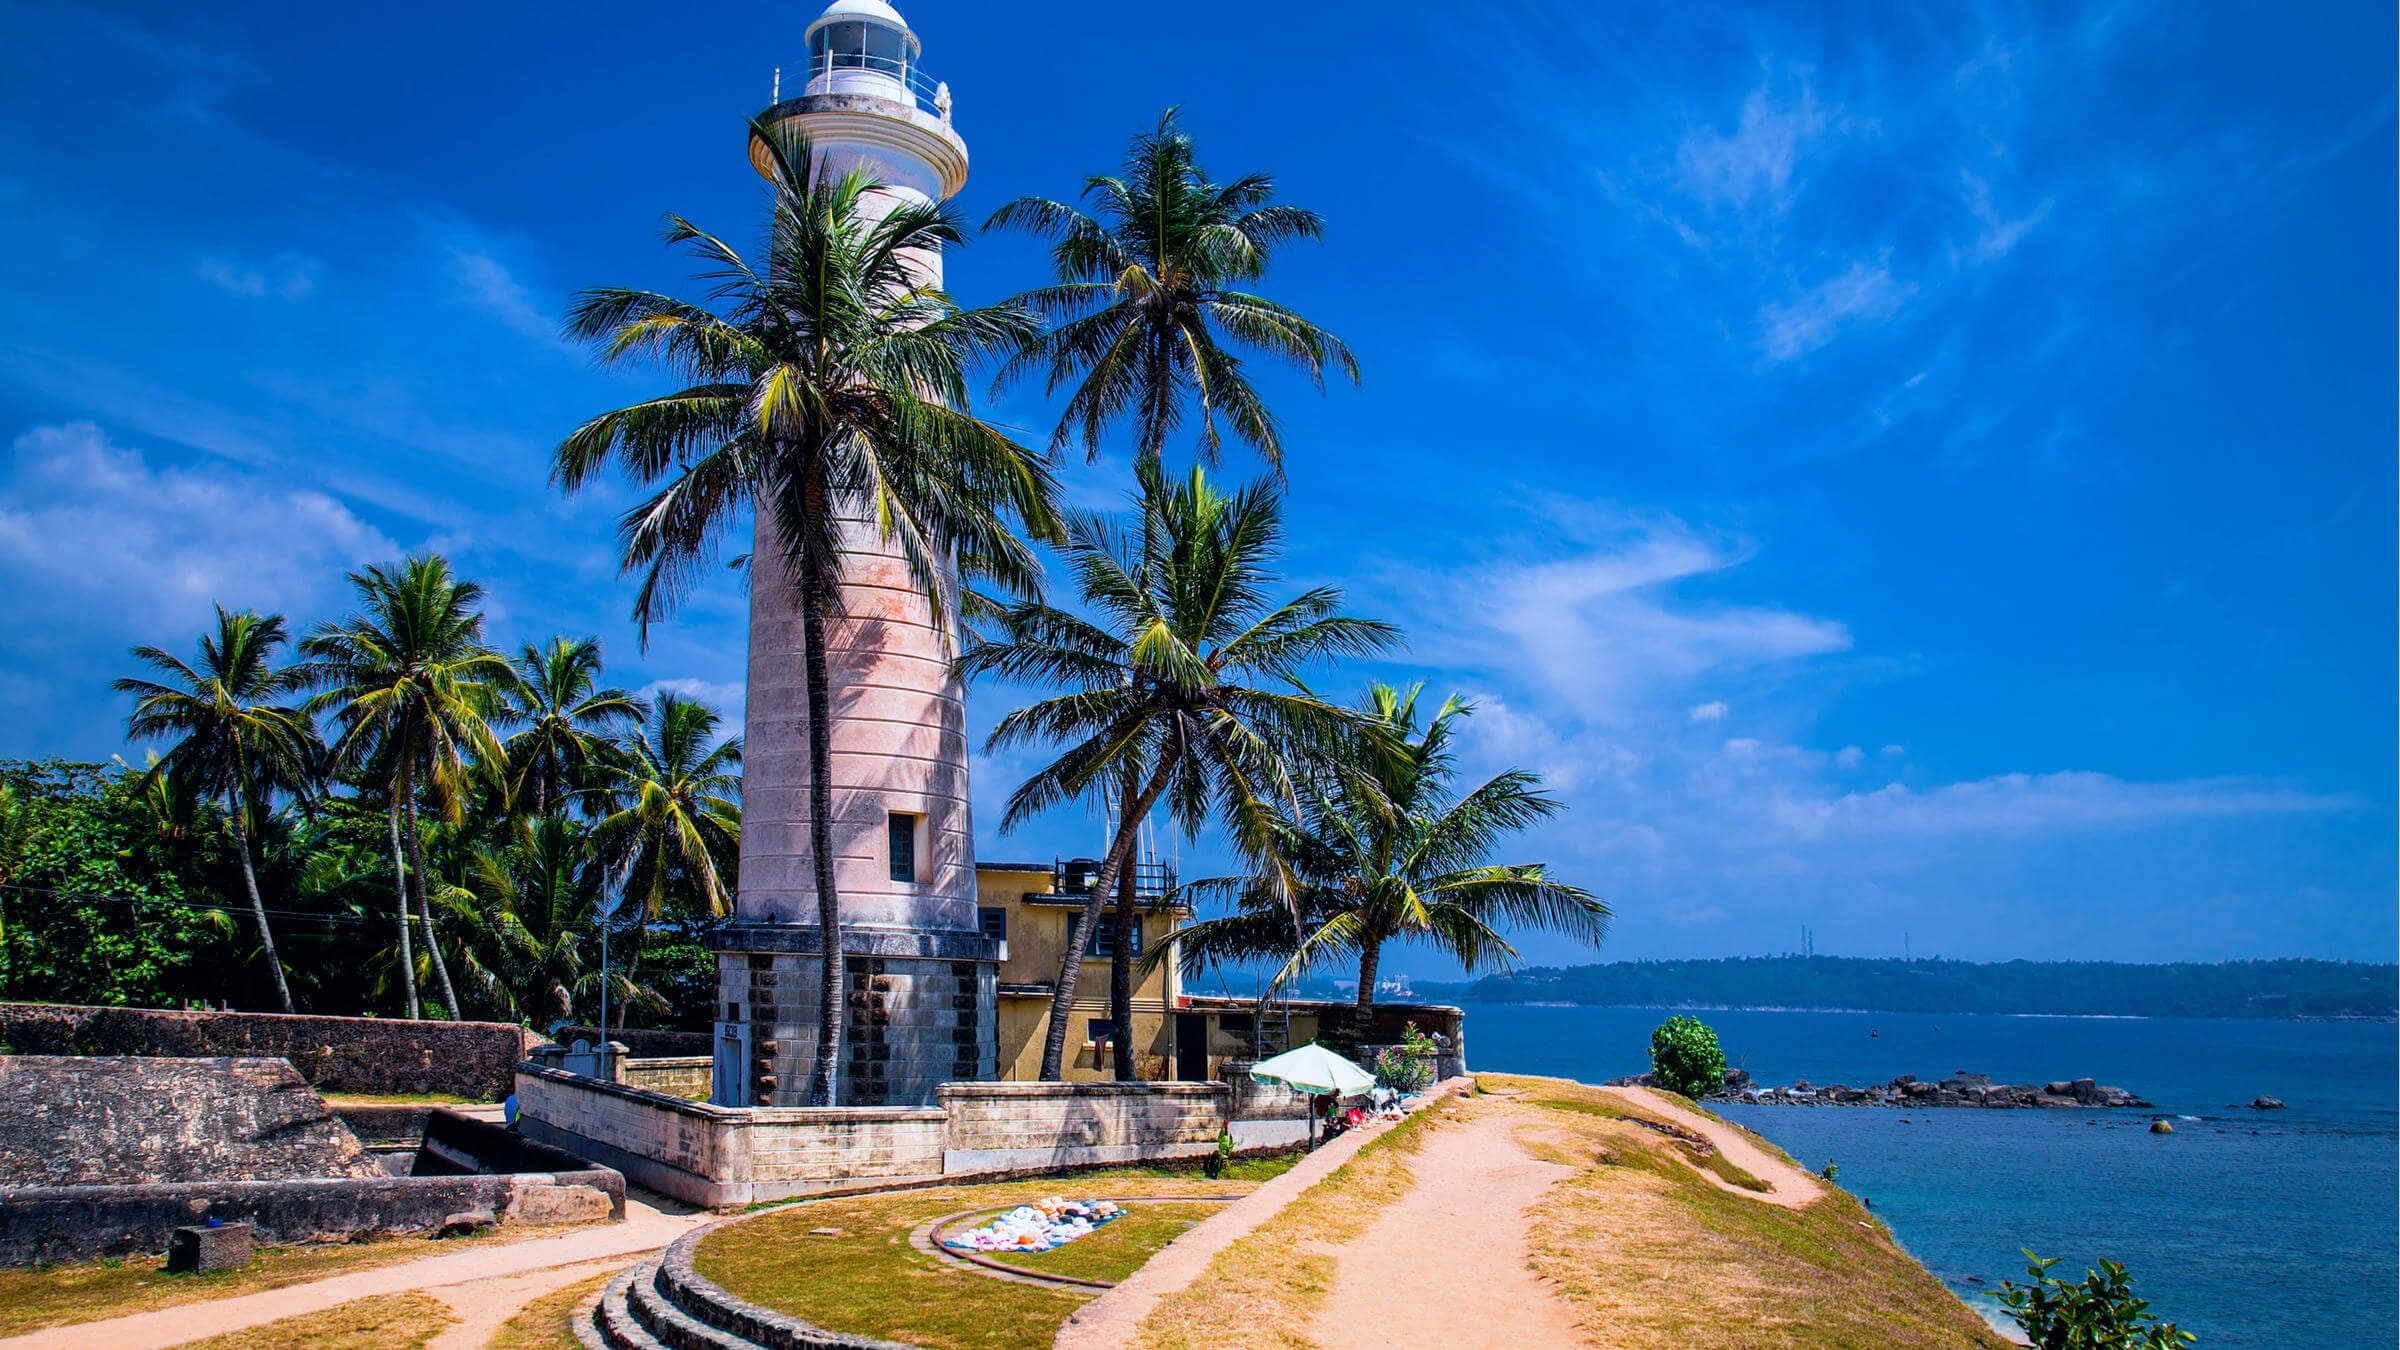 A beautiful scene of the lighthouse in Galle, Sri Lanka